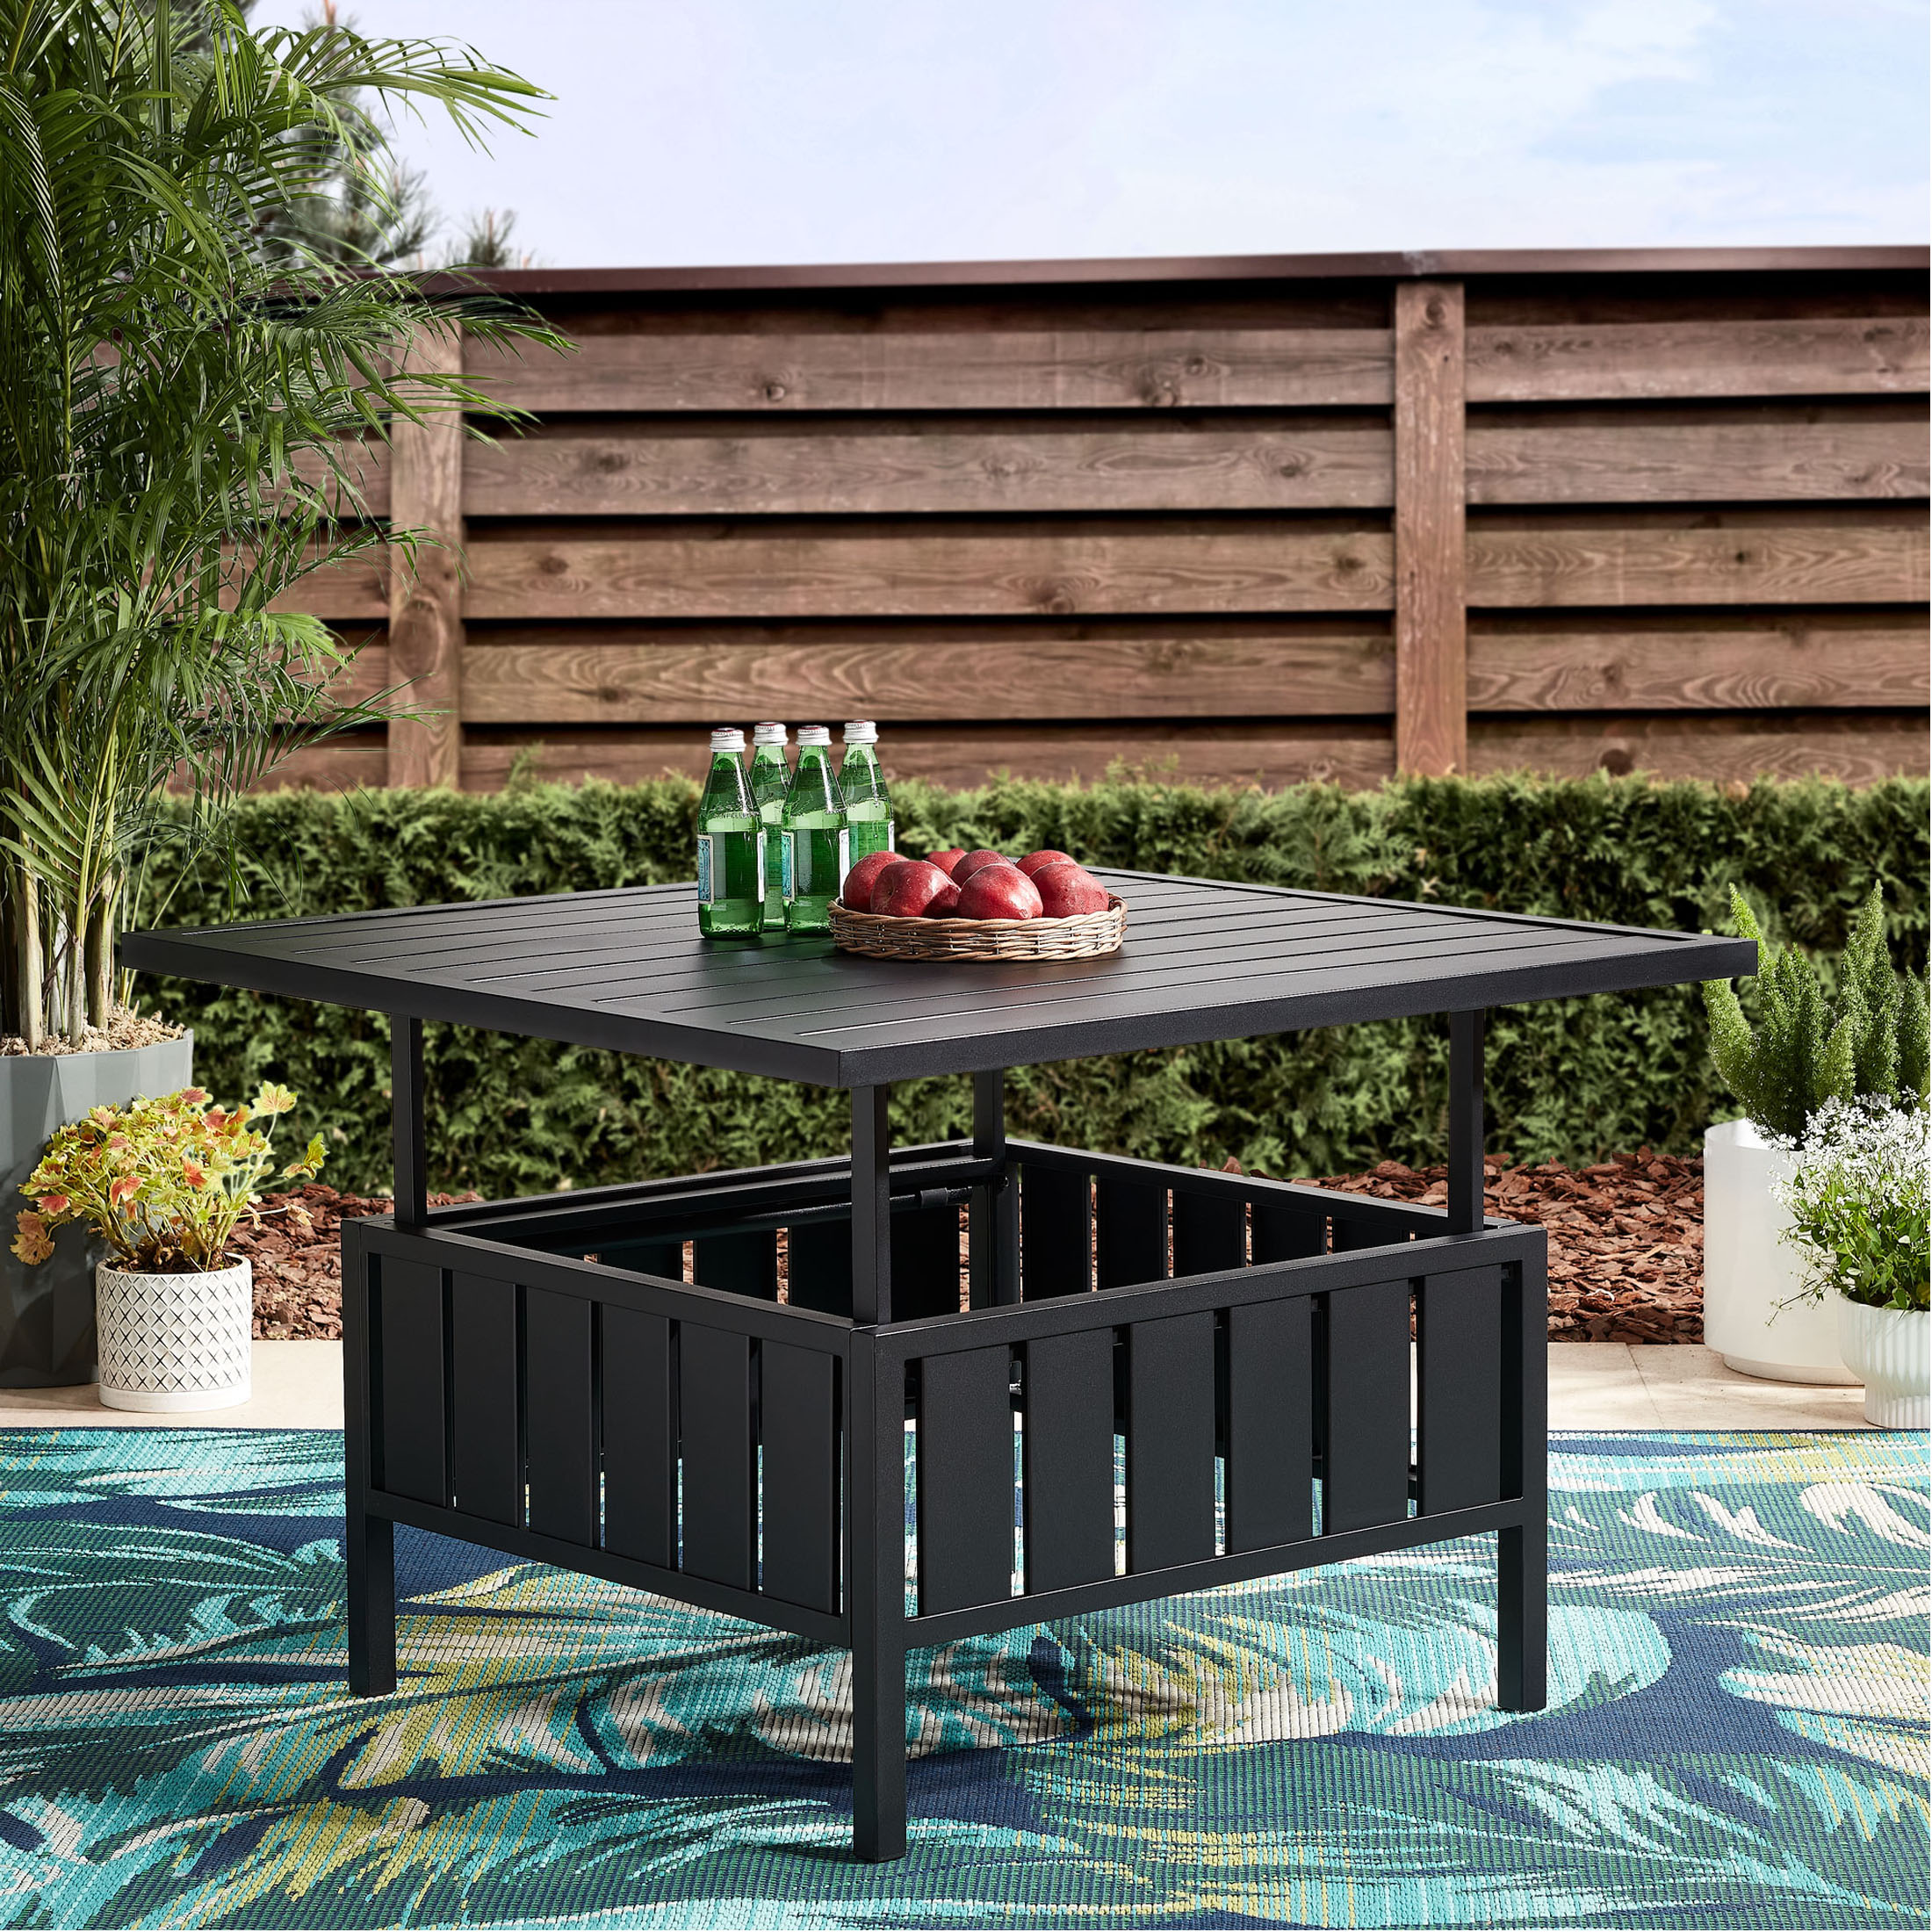 Mainstays Asher Springs Adjustable Rectangular Steel Outdoor Table - image 1 of 9